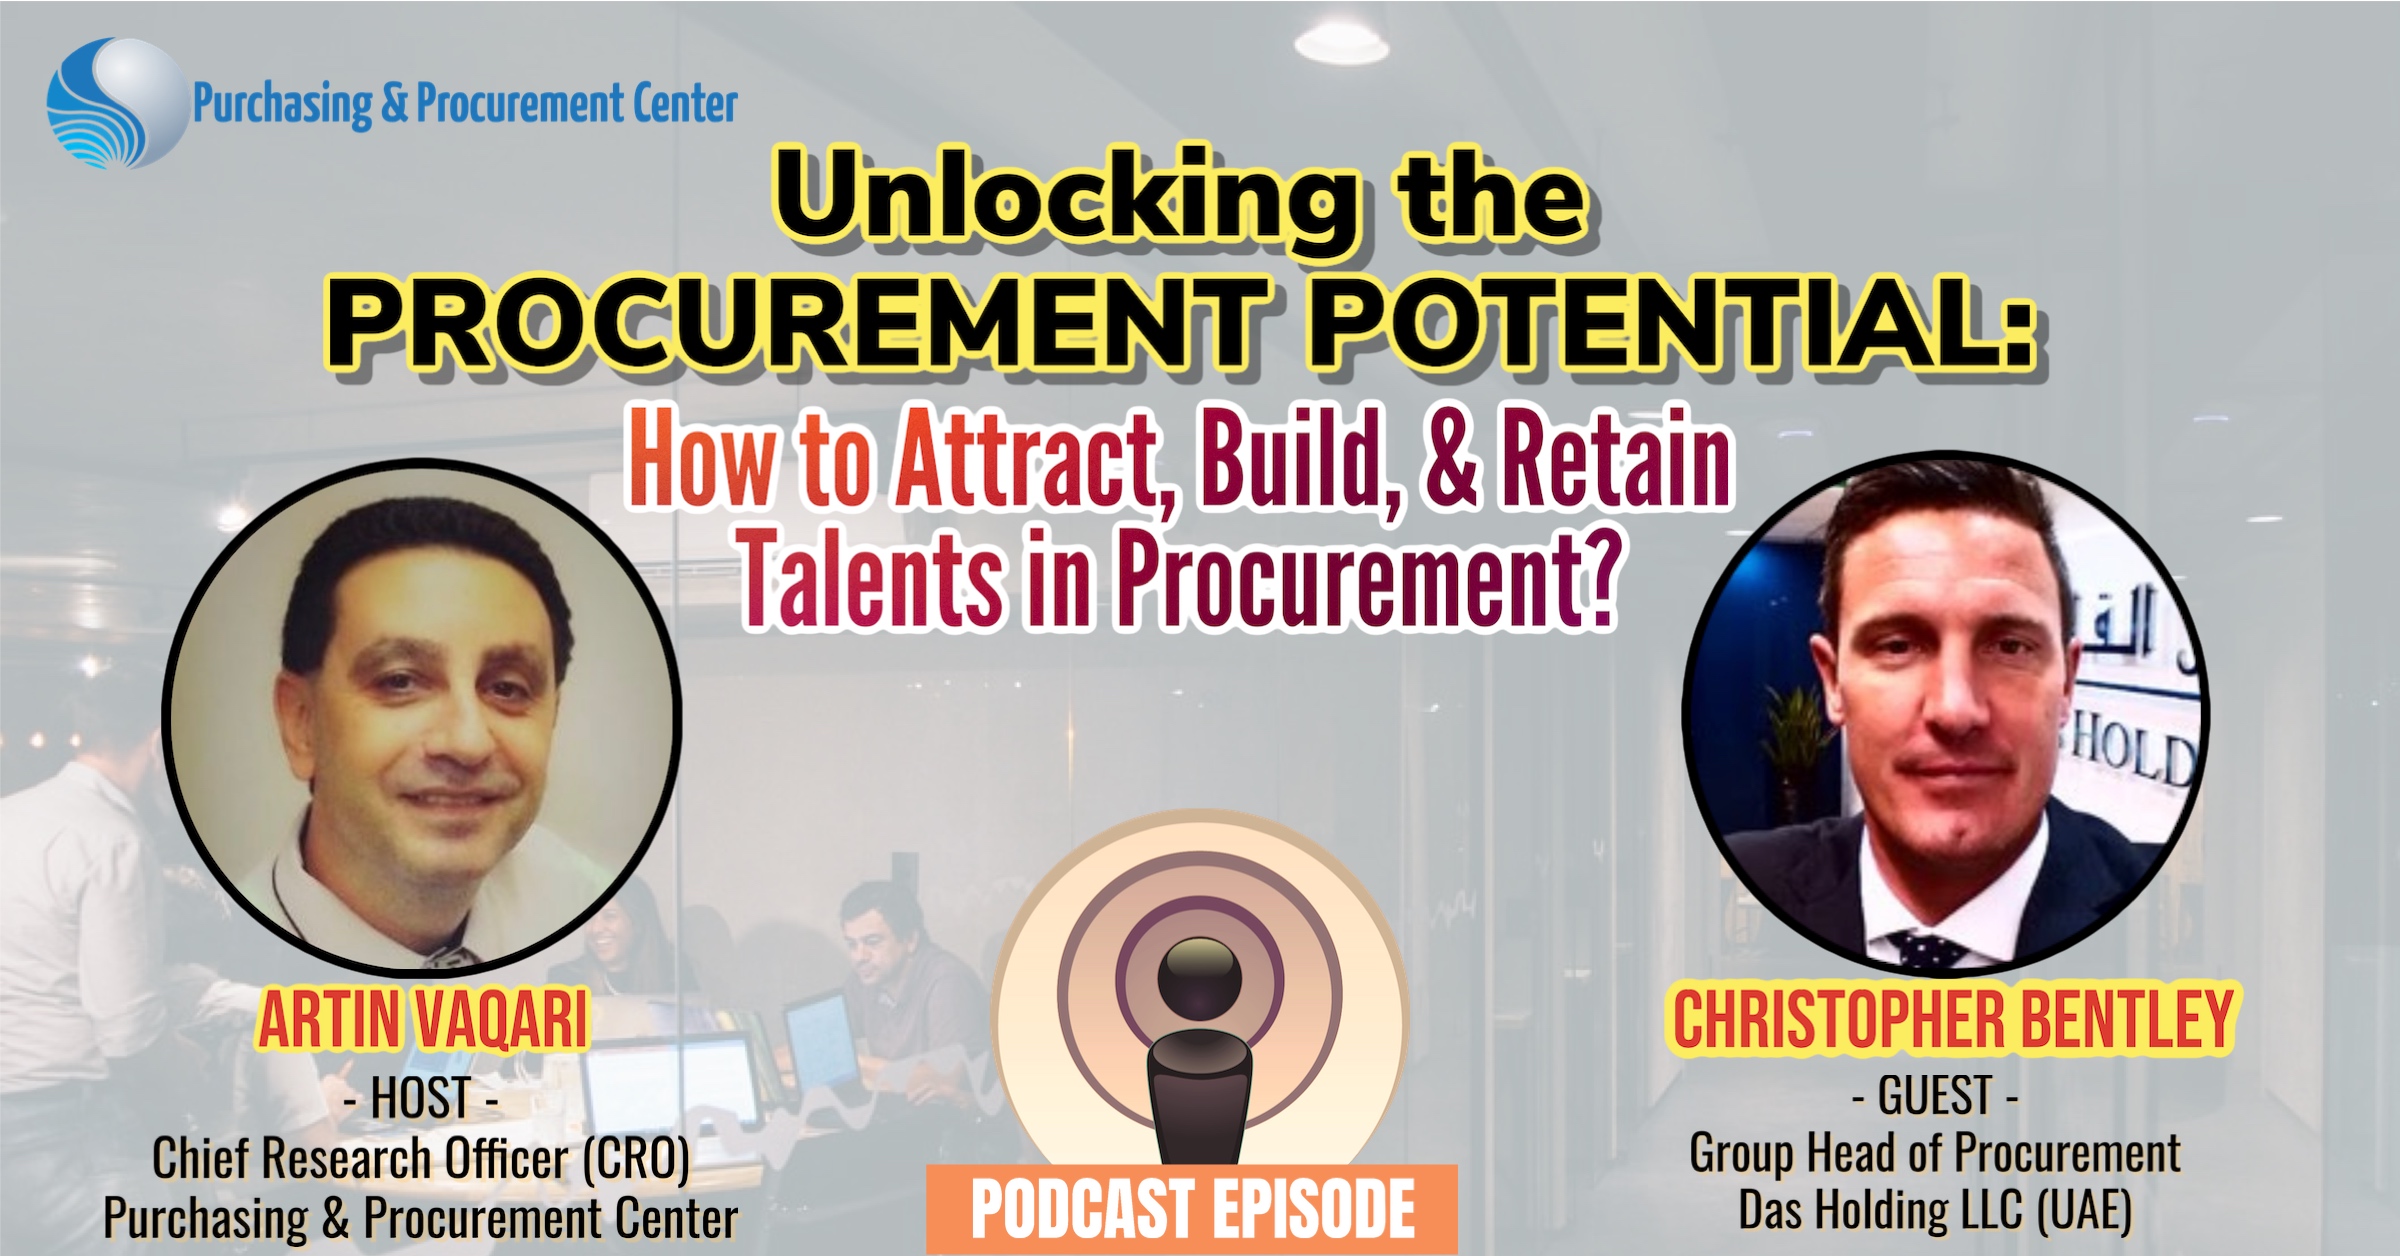 How to Attract, Build & Retain Talents in Procurement!